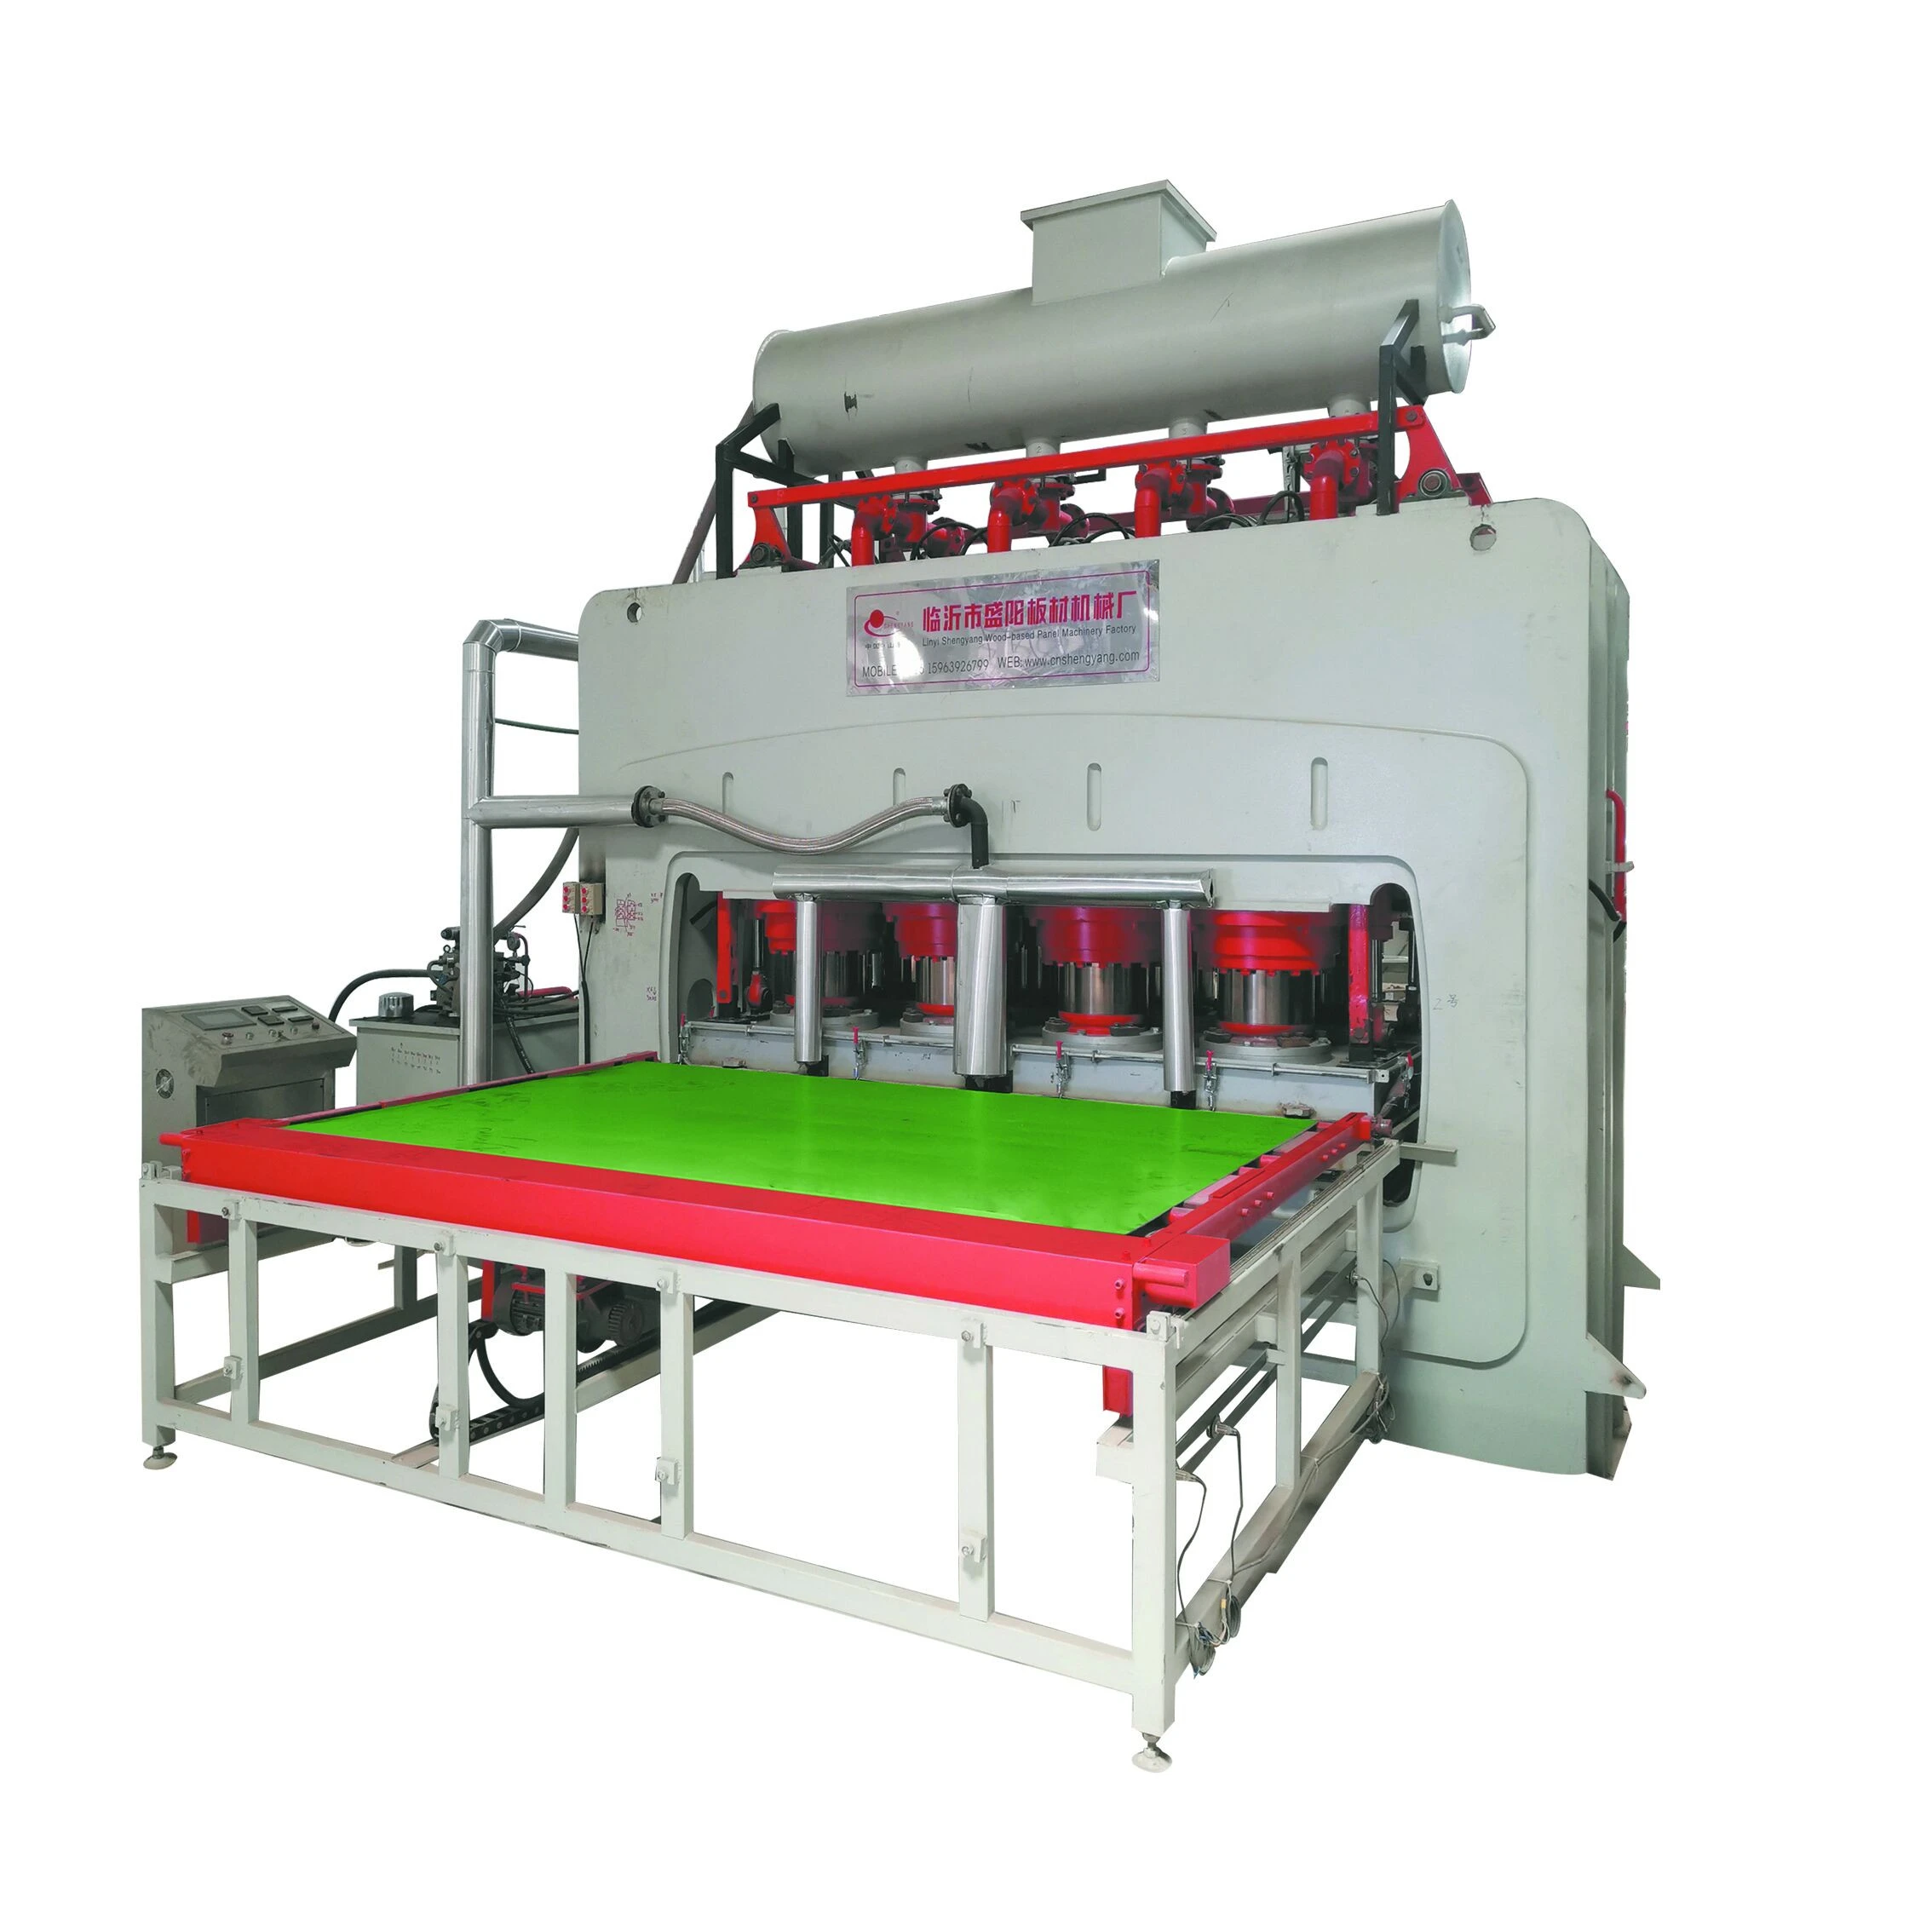 Melamine hot press/ laminating machine for MDF/ particle board